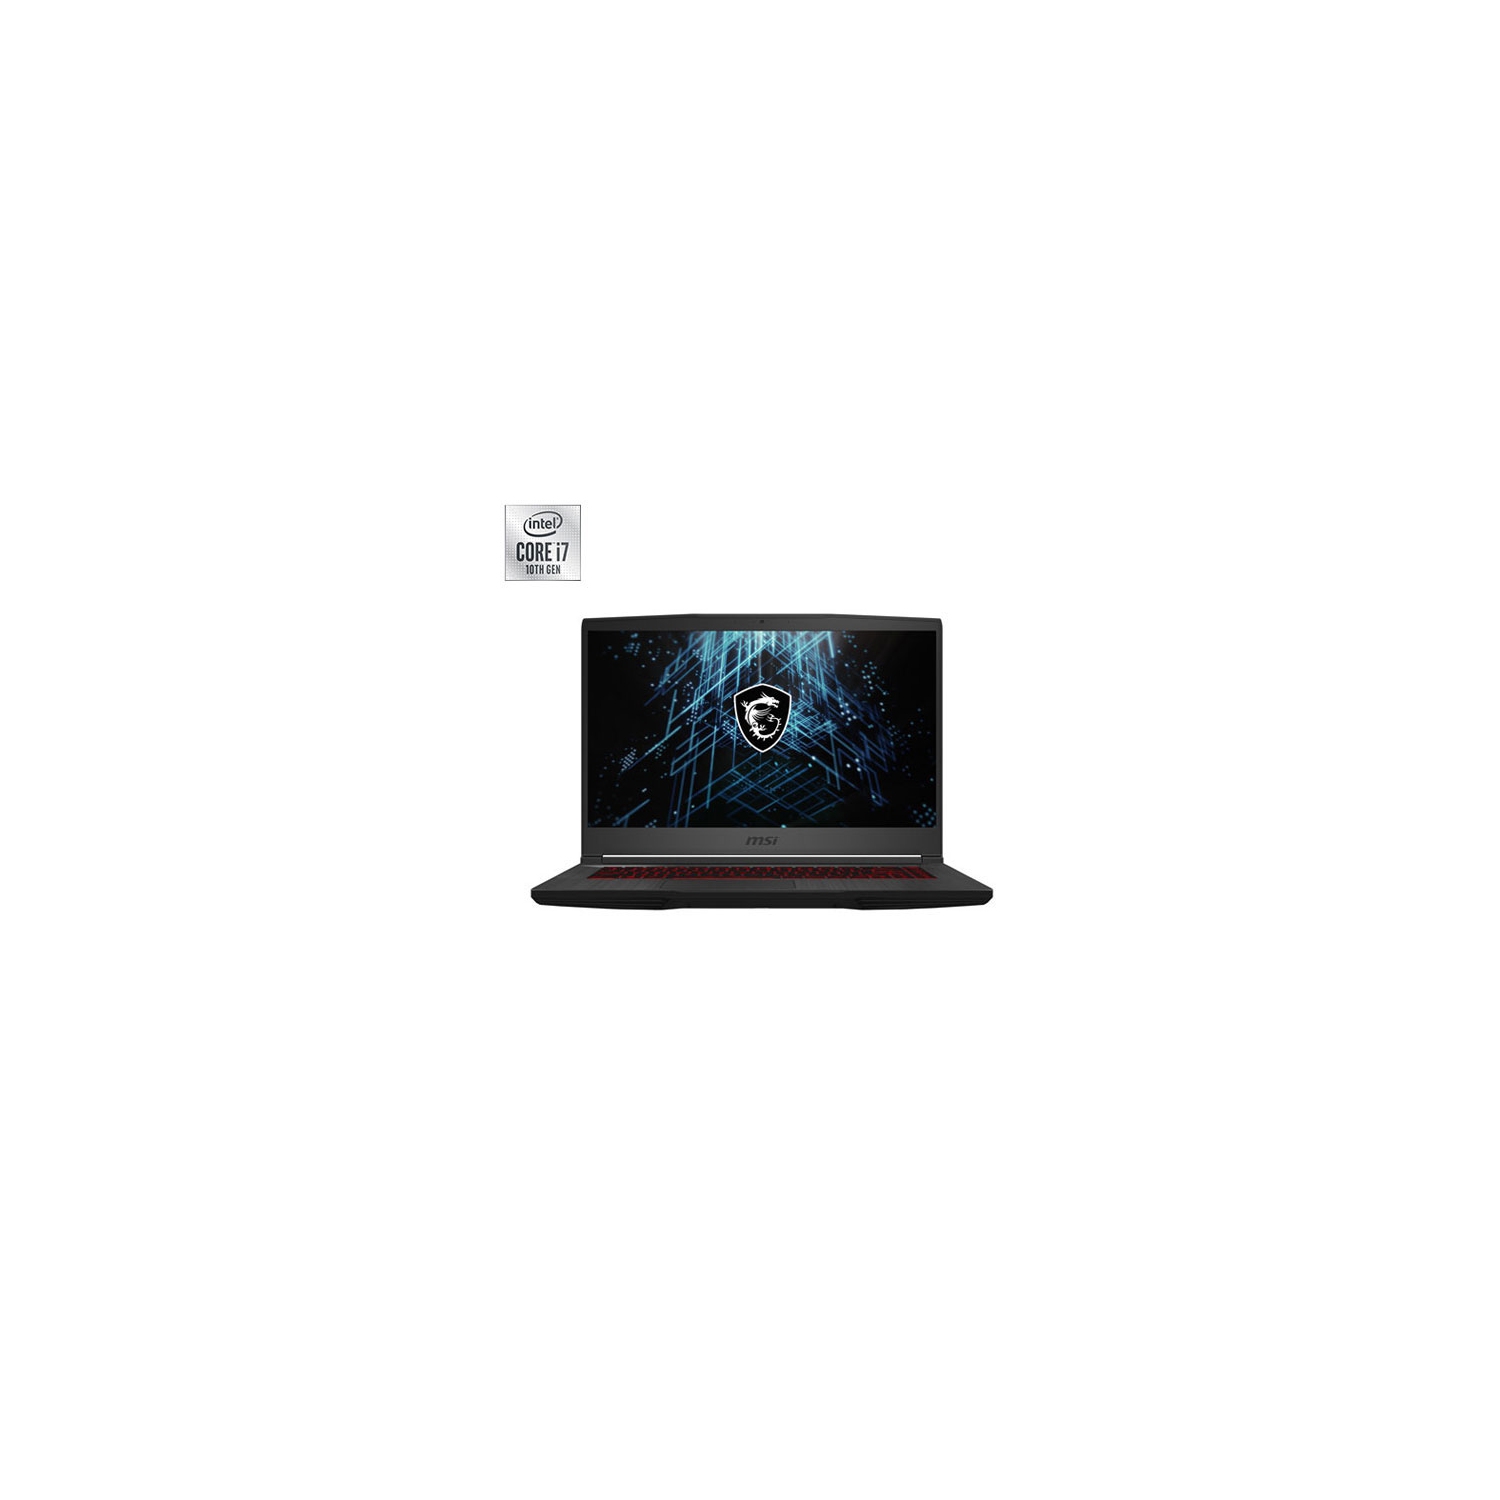 MSI 15.6" Gaming Laptop (Intel Core i7-10750H/1TB SSD/16GB RAM/NVIDIA GeForce RTX 3060) -Only at Best Buy - Refurbished